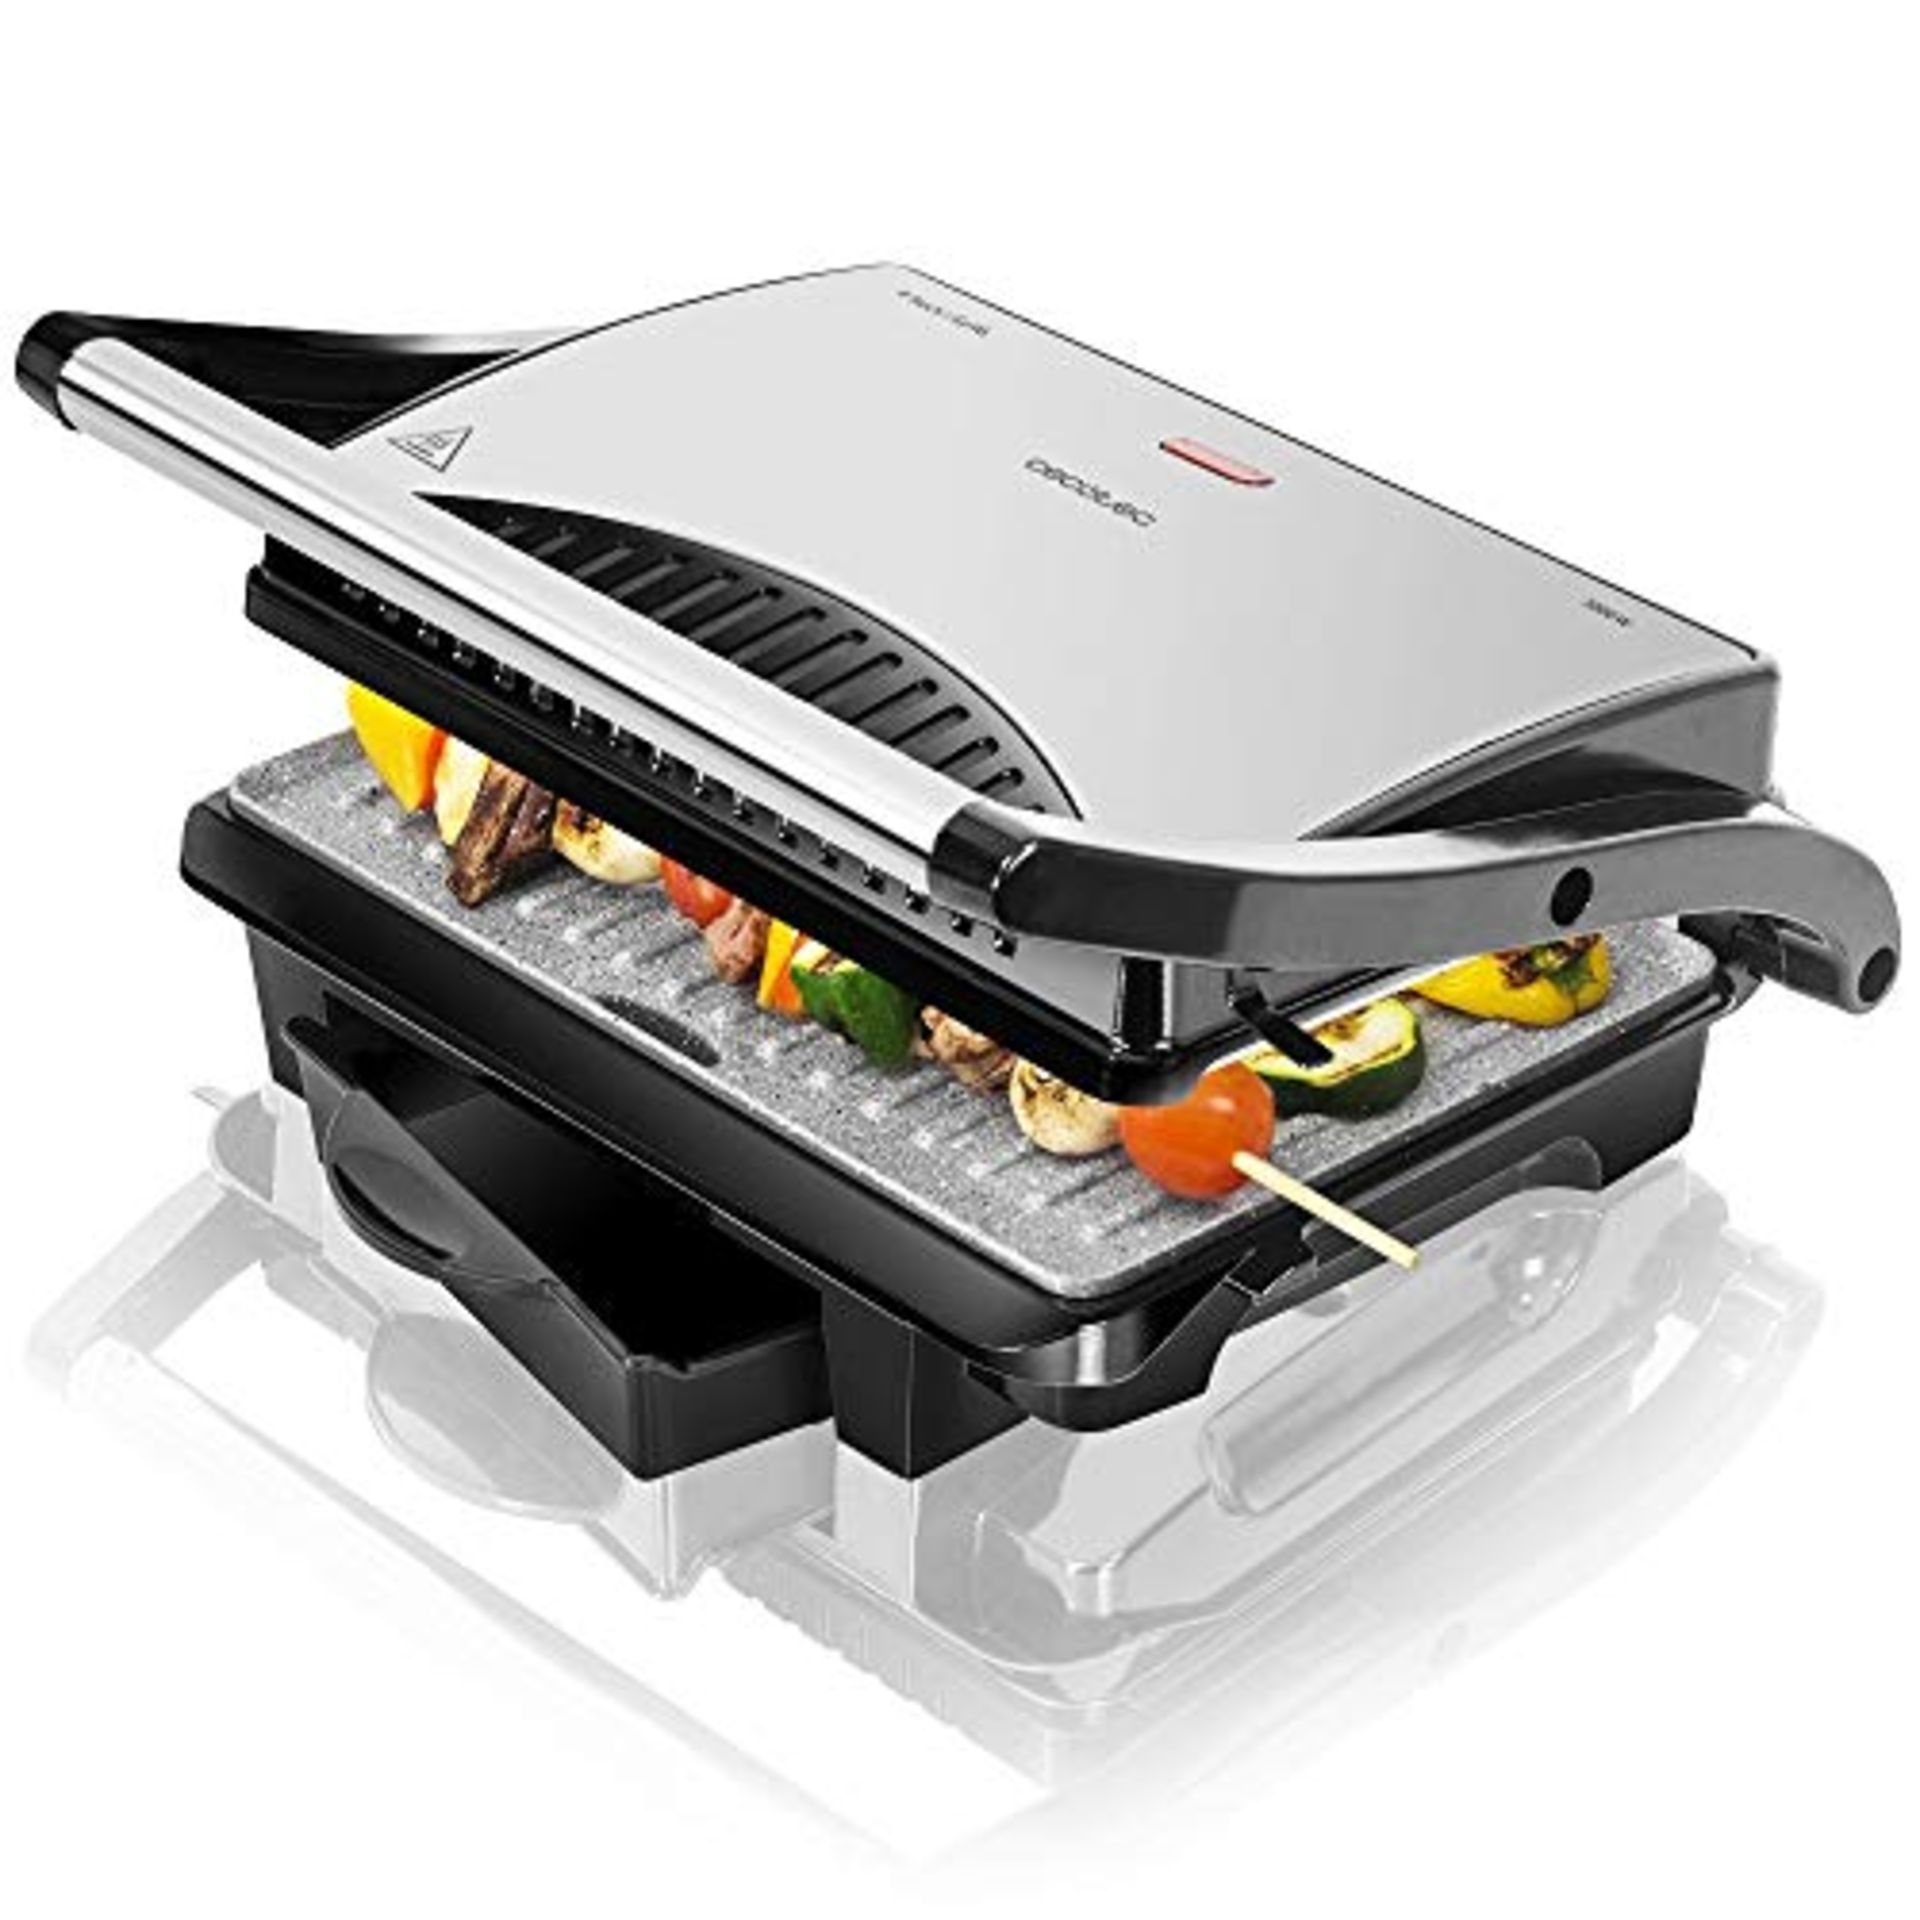 Cecotec Rock'nGrill 1000 Electric Grill. 1000 W, RockStone non-stick coating, Floating